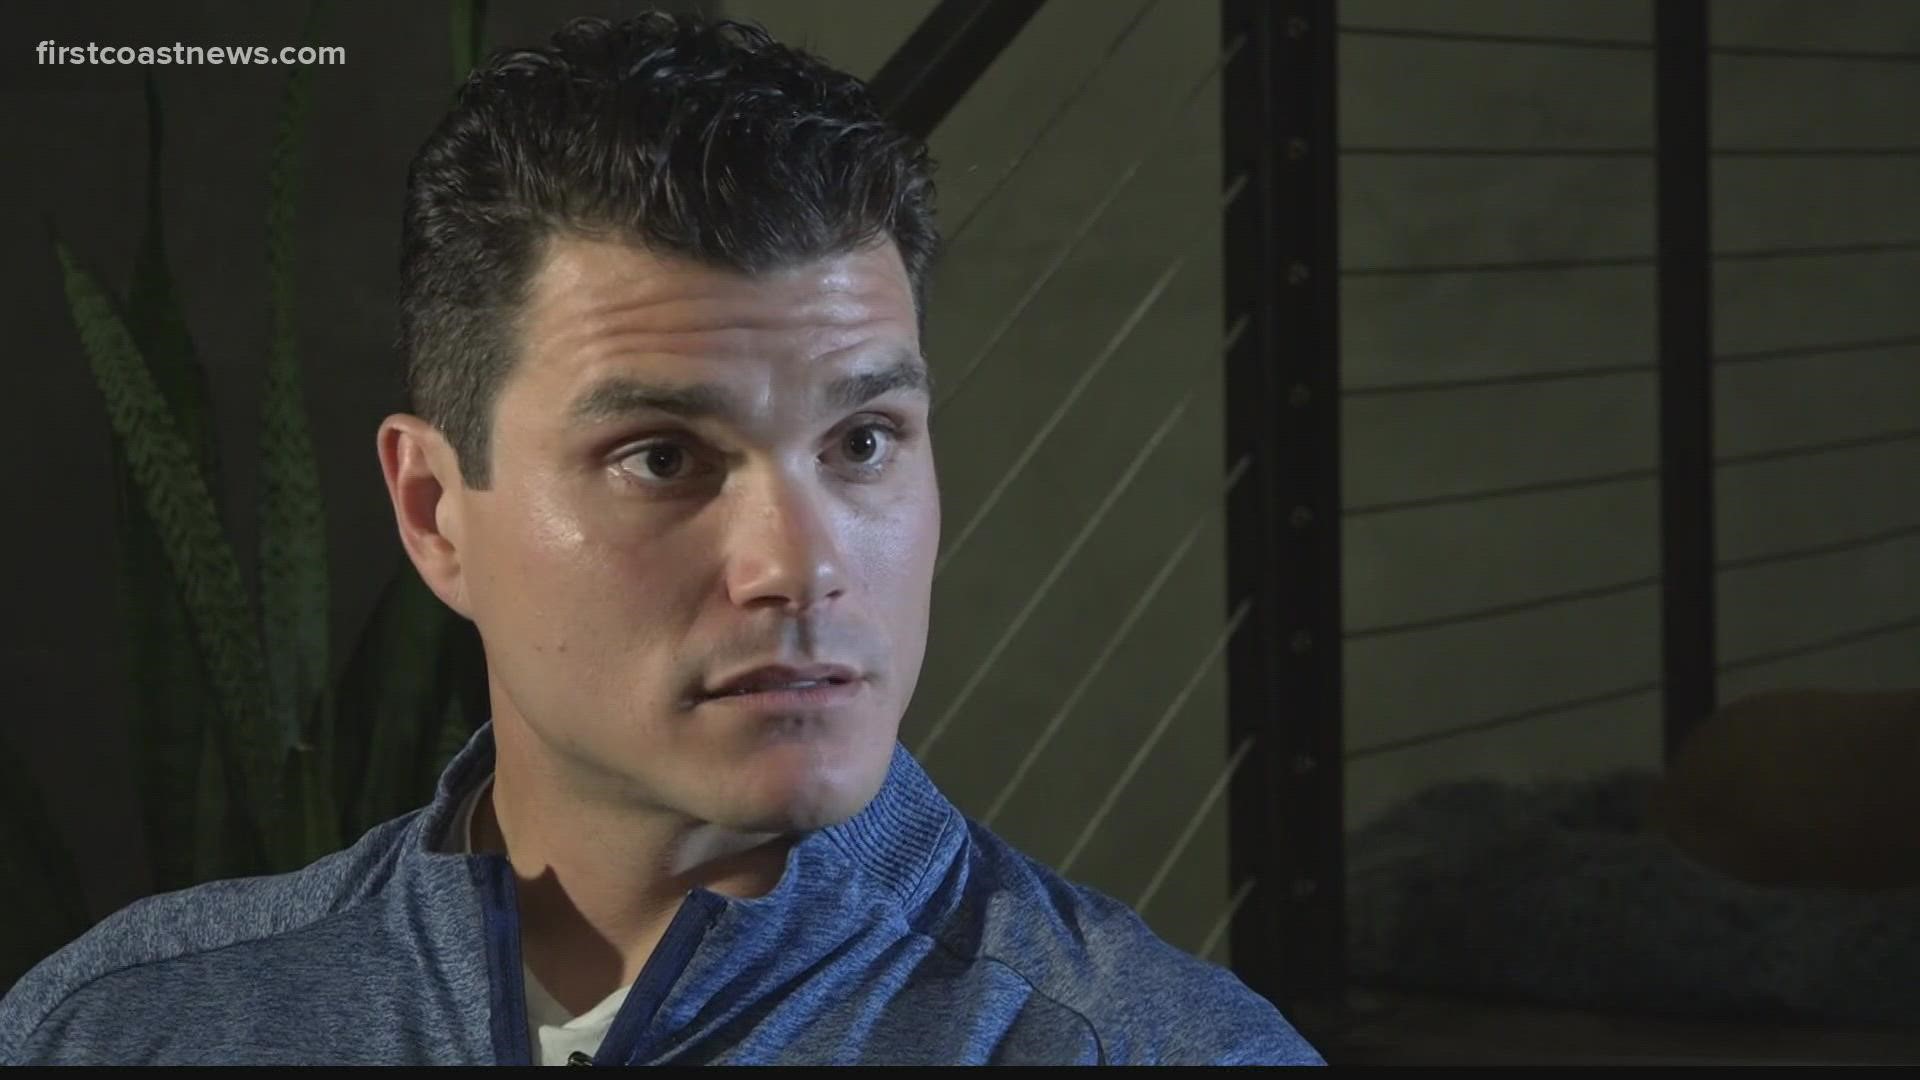 Former Jacksonville Jaguars kicker Josh Lambo spoke to First Coast News only about what he's says was a toxic environment for him under Urban Meyer.